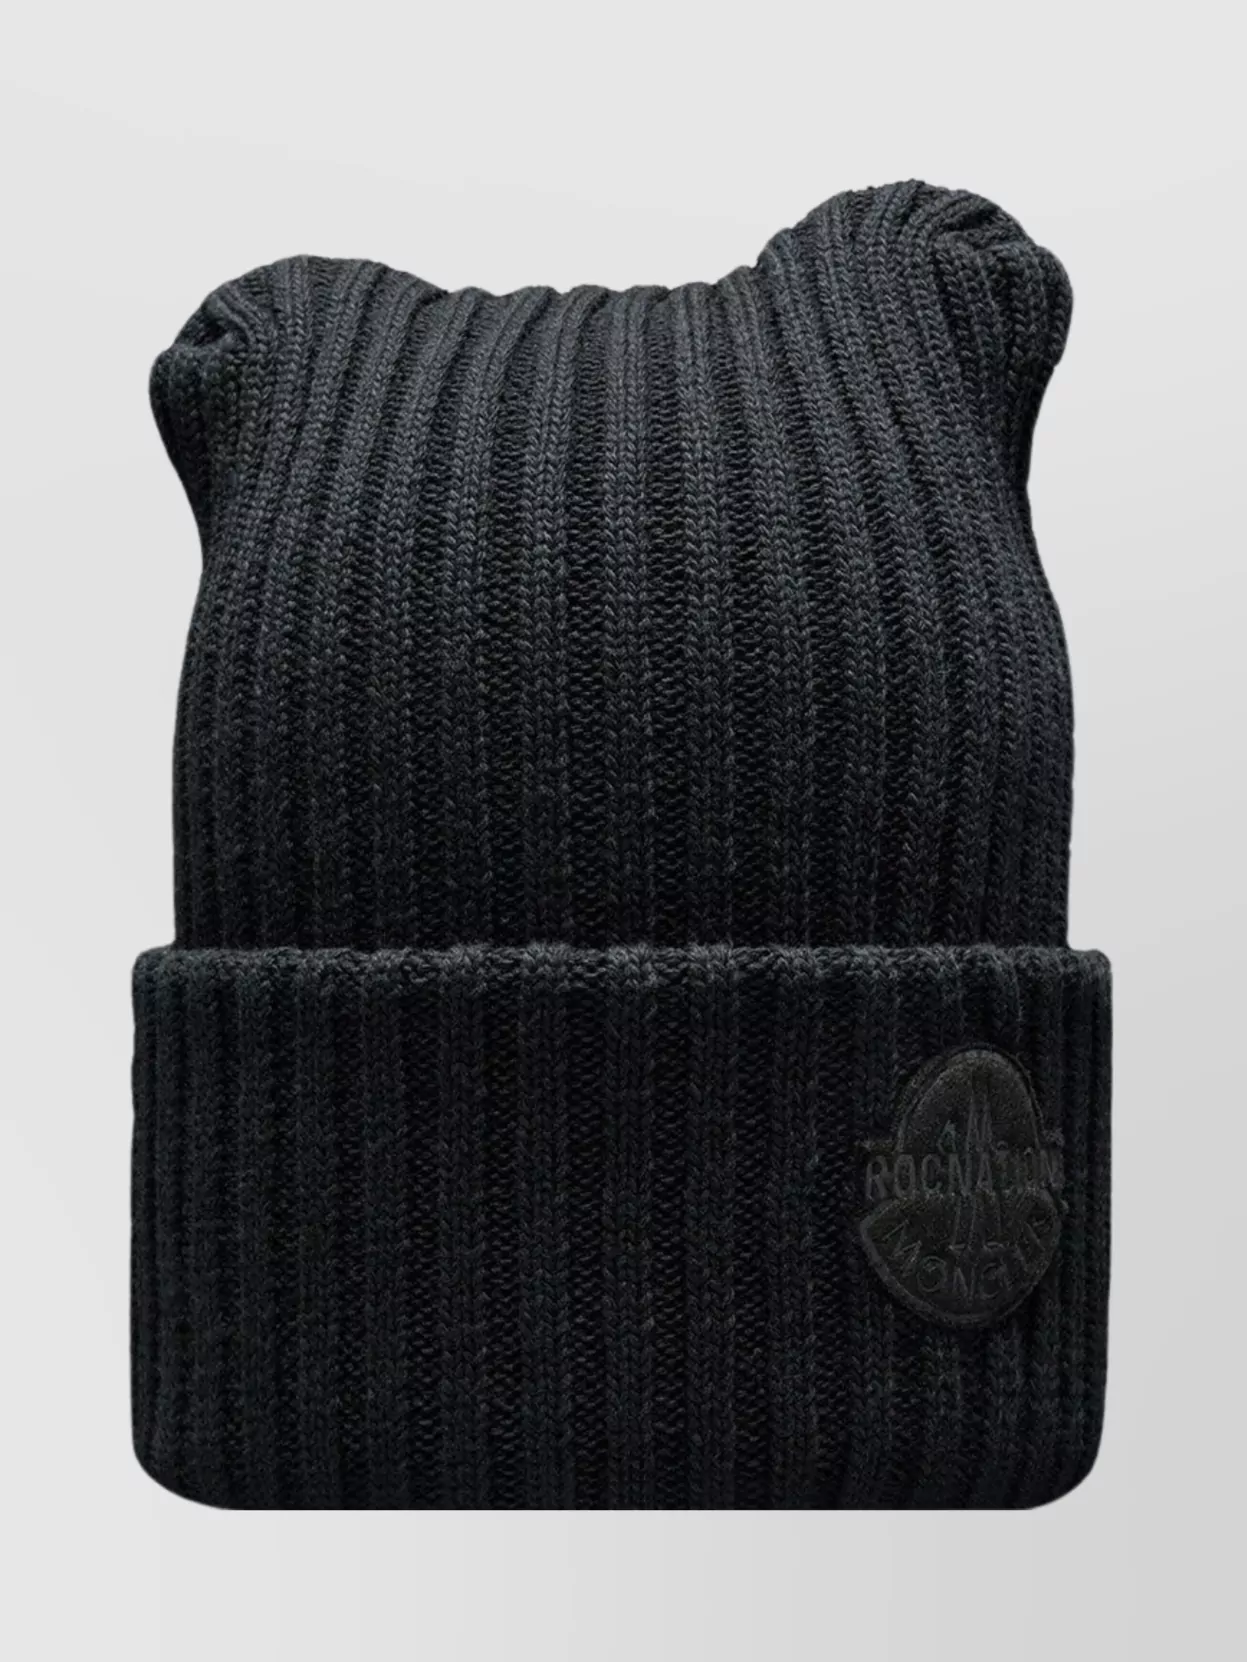 Shop Moncler Genius Folded Wool Beanie Collaboration Moncler X Roc Nation In Black